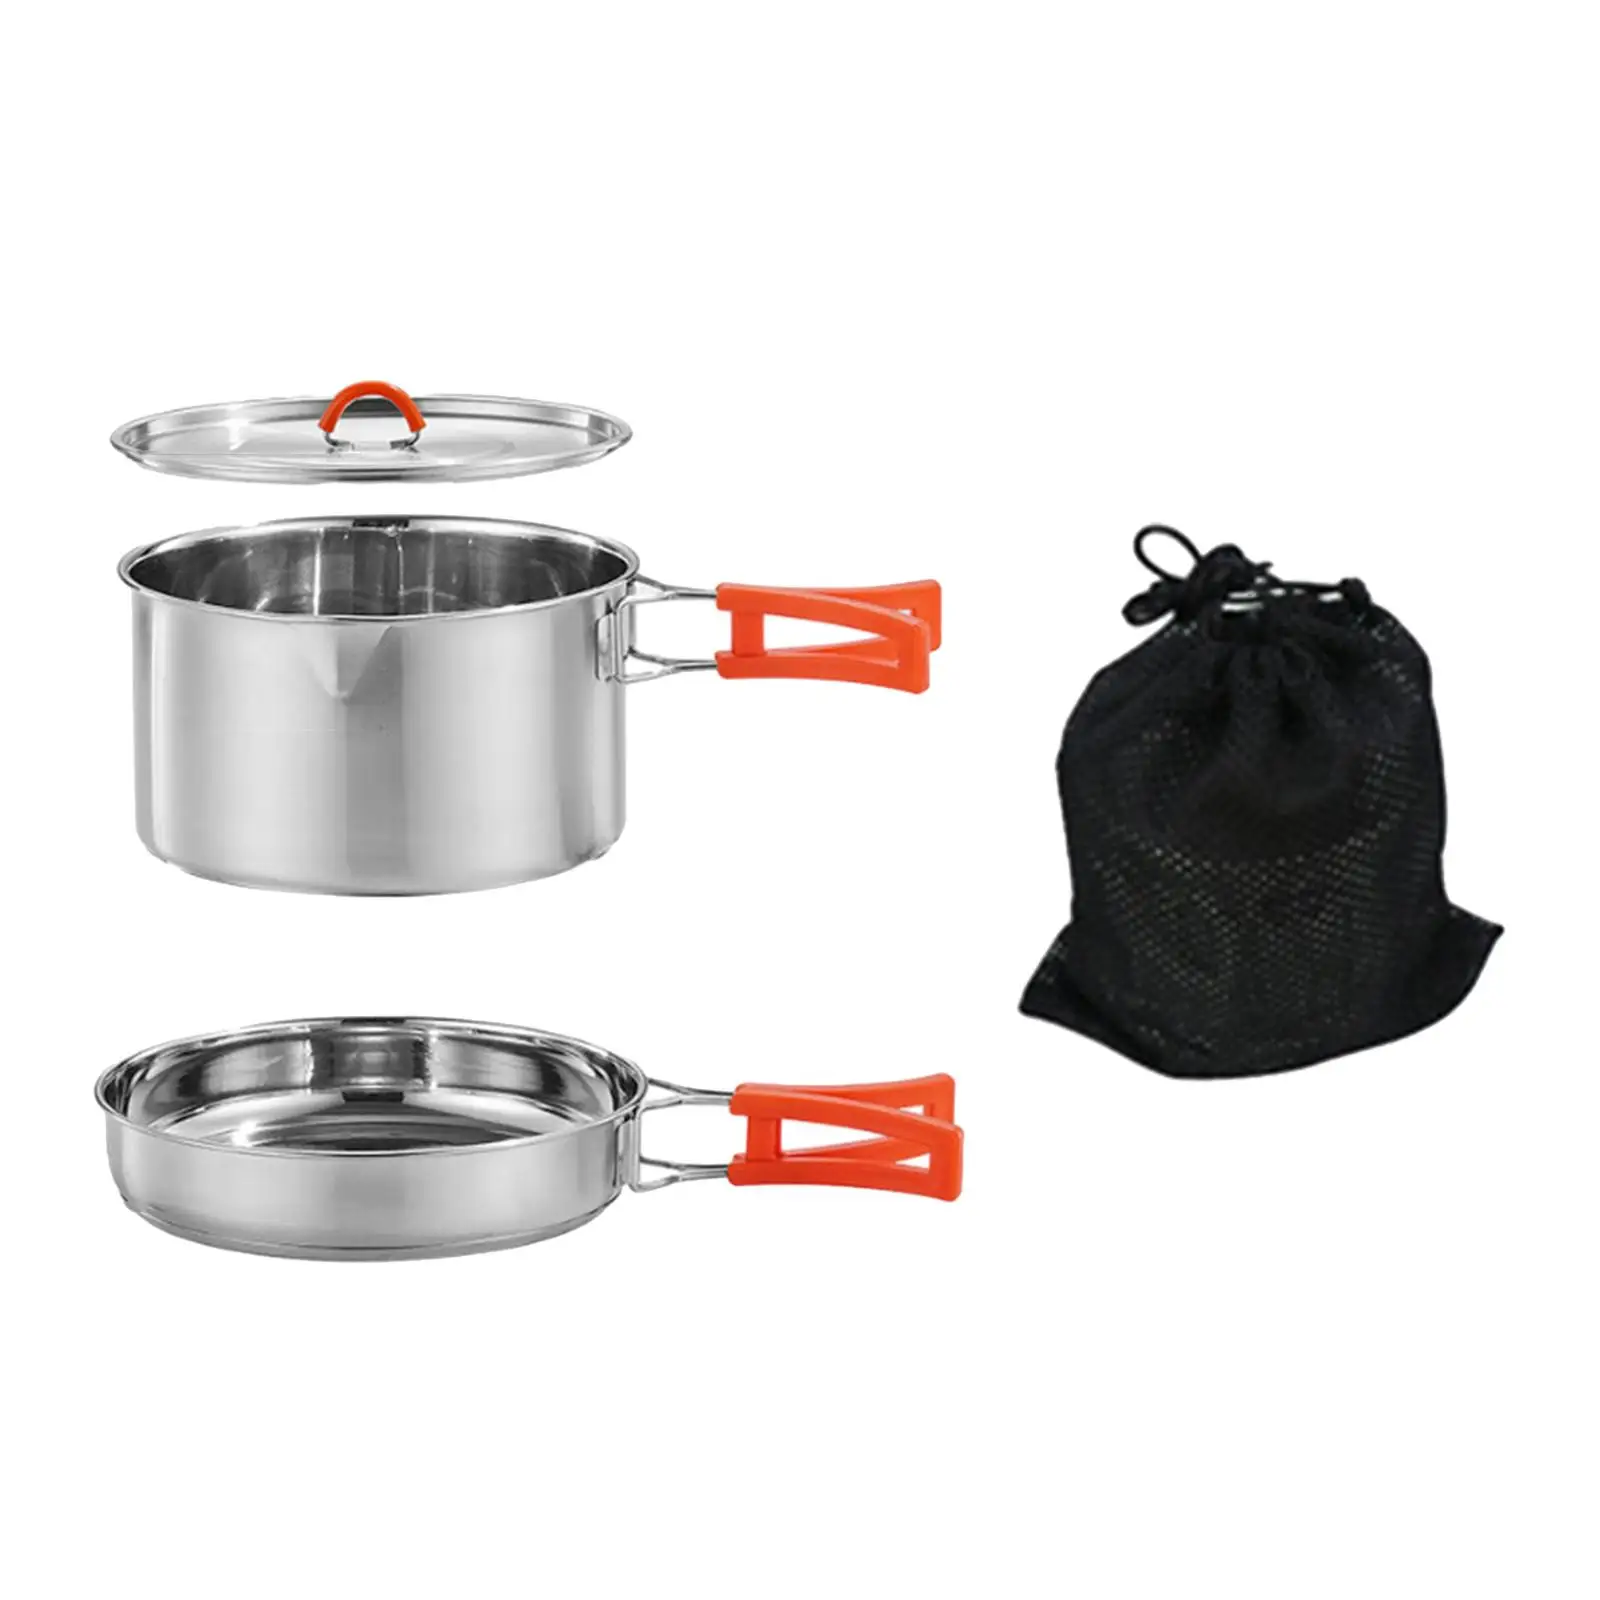 Camping Cookware Compact Lightweight Durable Stainless Steel with Mesh Carry Bag for Camp Outdoor Hiking Backpacking Equipment